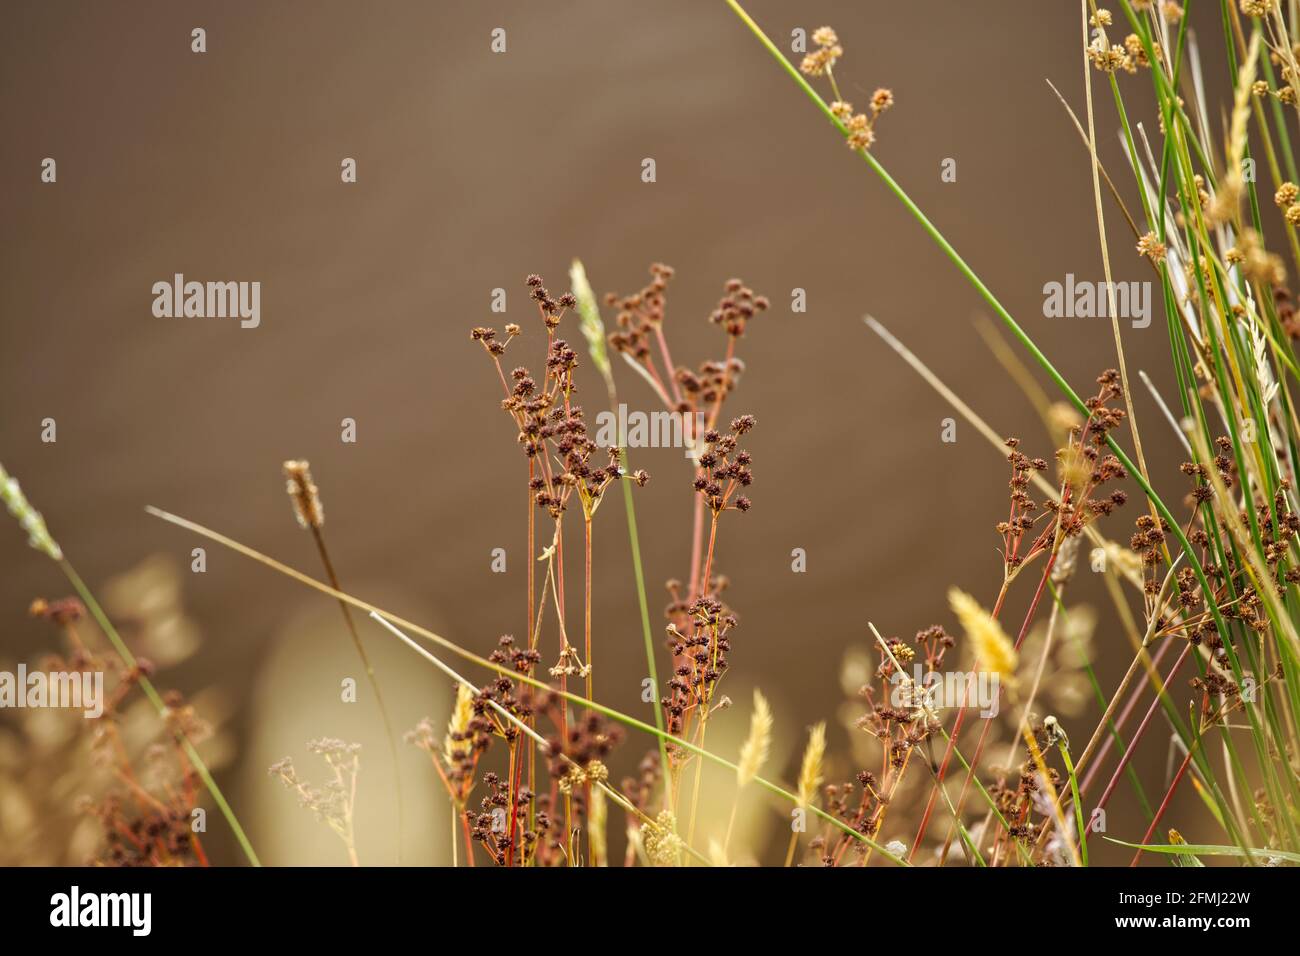 Summer plant seed heads beside a pond with dark background. Stock Photo